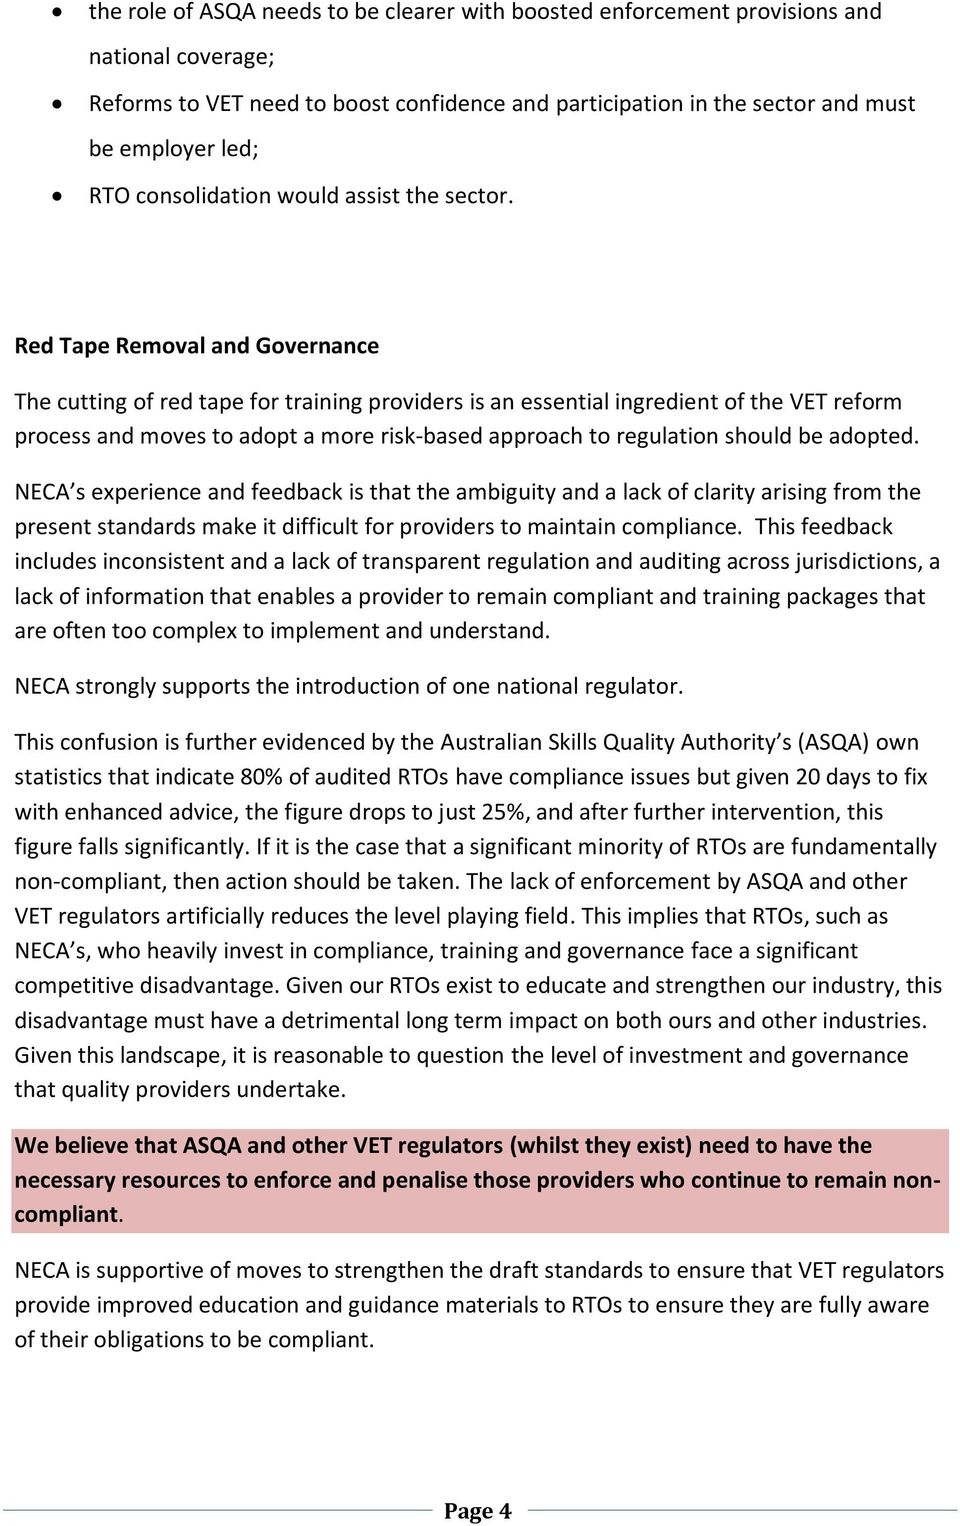 Red Tape Removal and Governance The cutting of red tape for training providers is an essential ingredient of the VET reform process and moves to adopt a more risk-based approach to regulation should